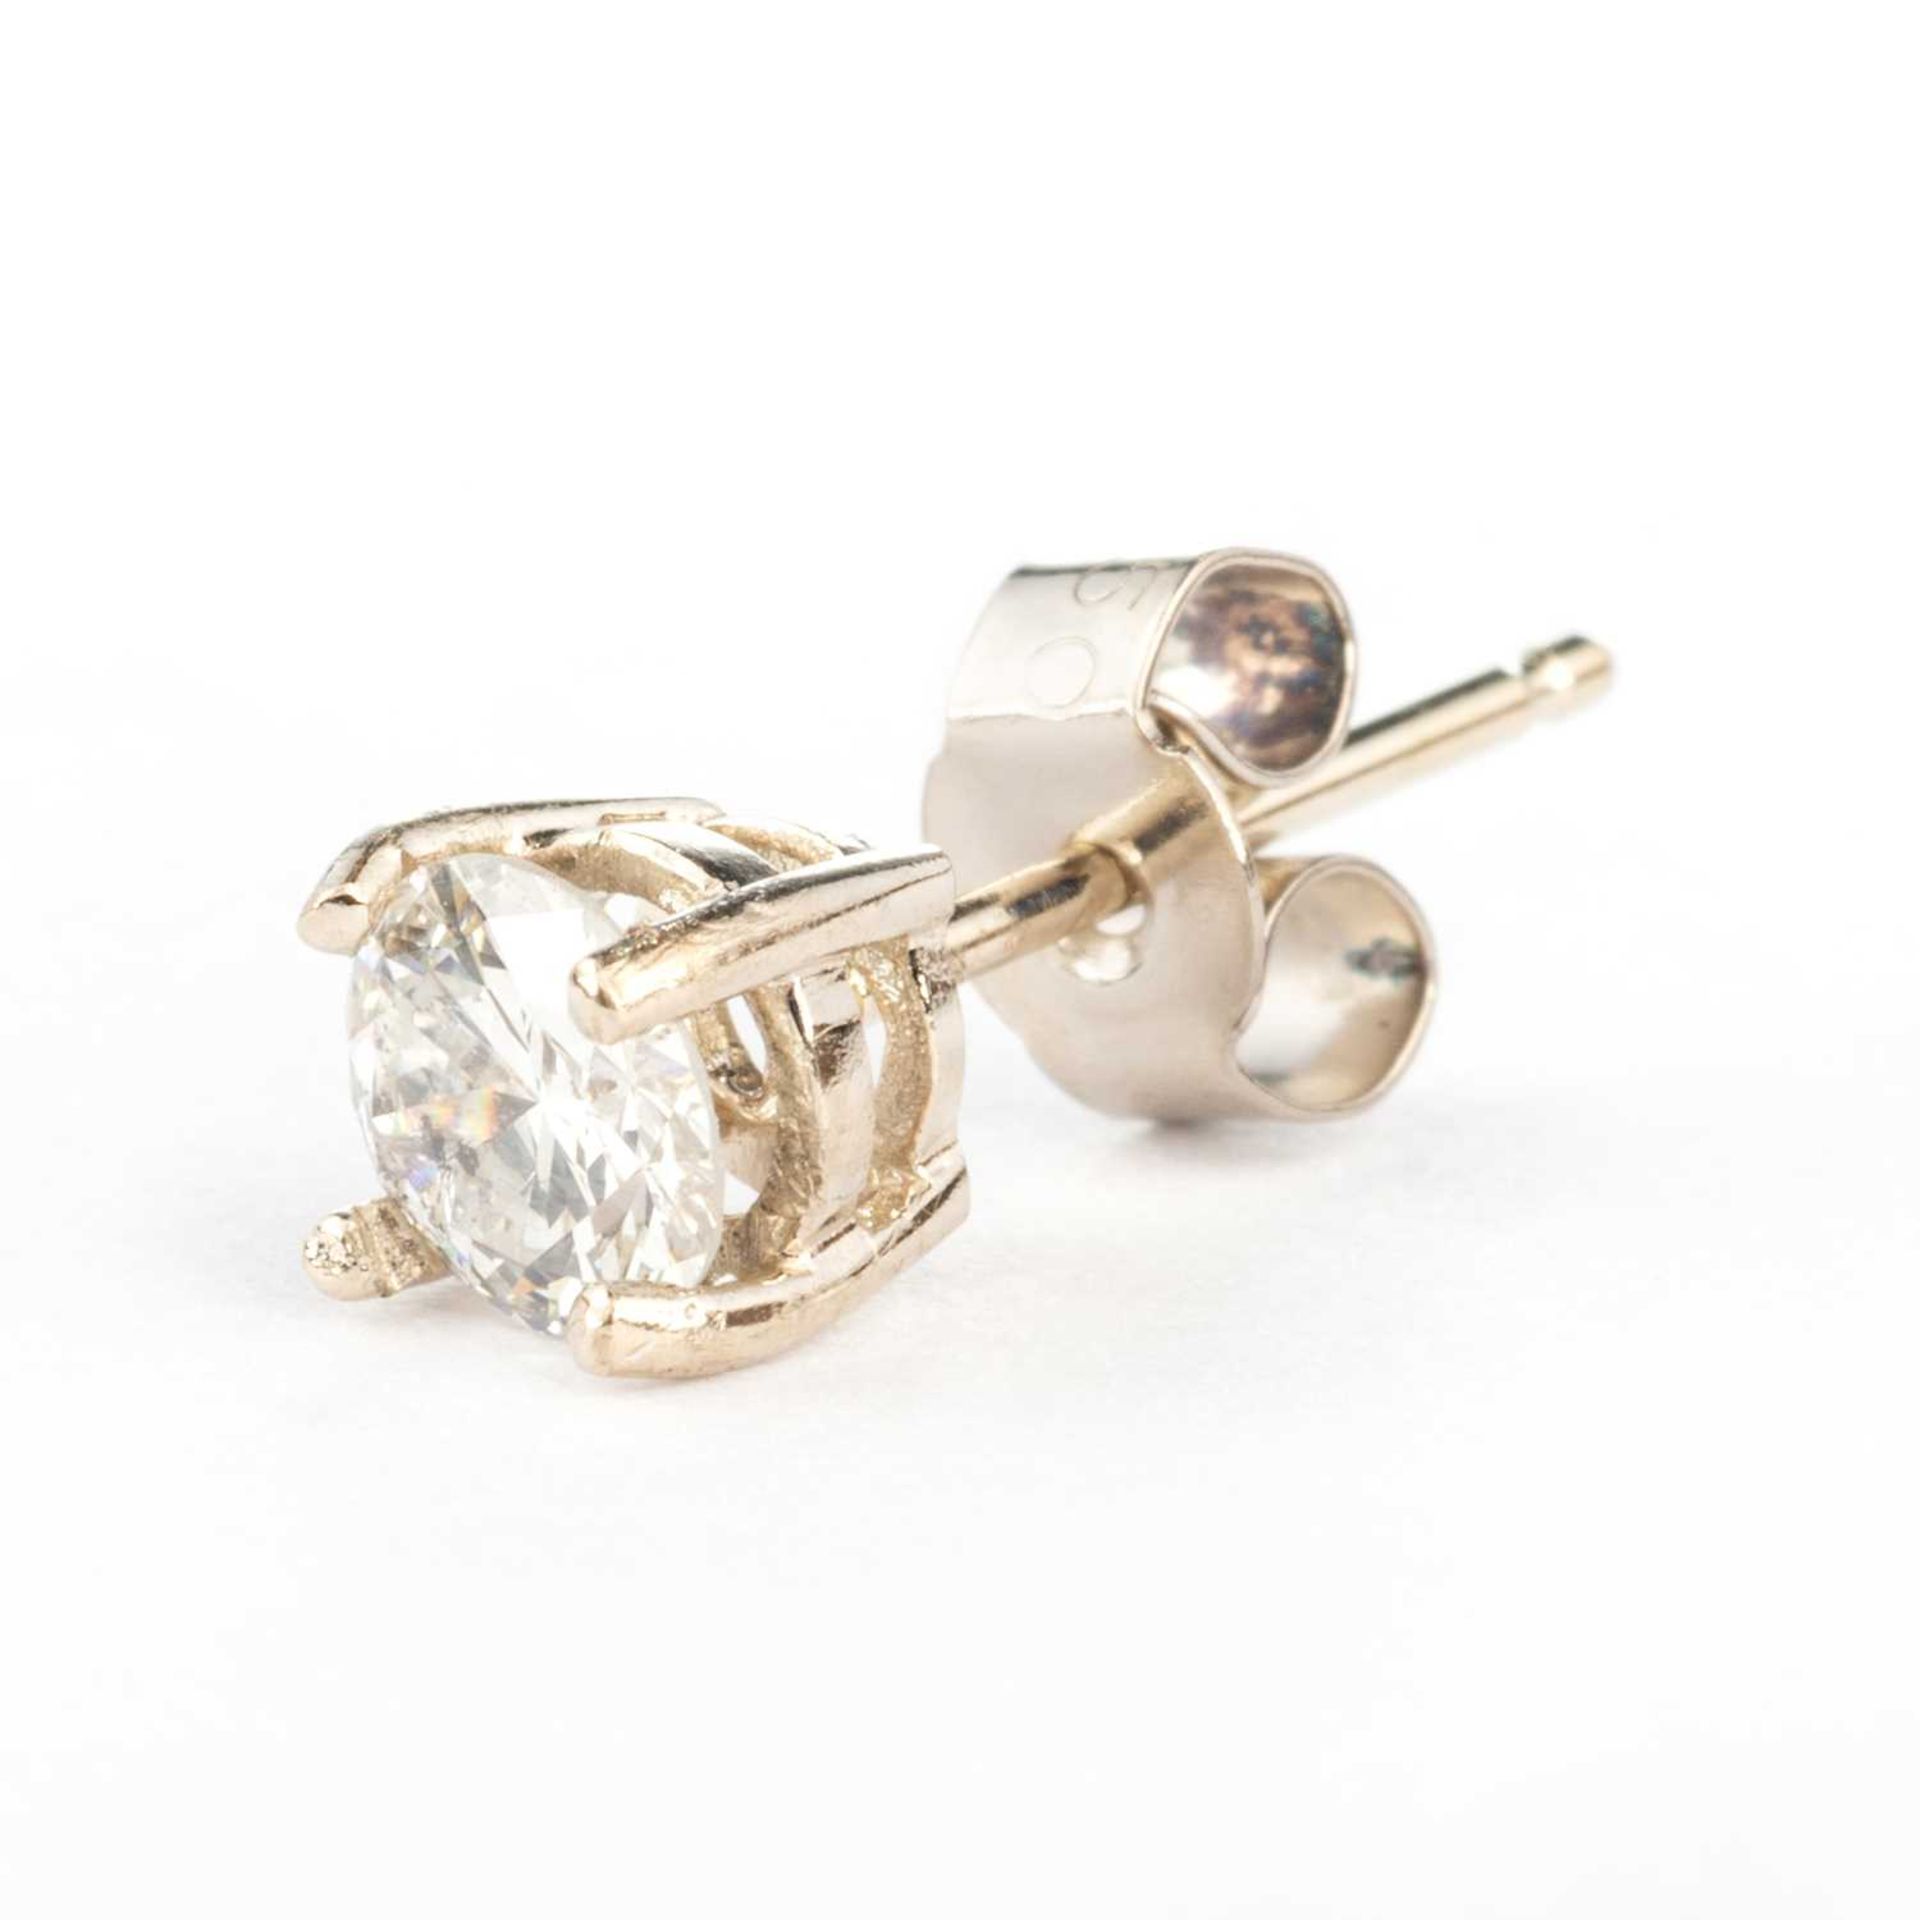 A PAIR OF SOLITAIRE DIAMOND EARRINGS - Image 2 of 3